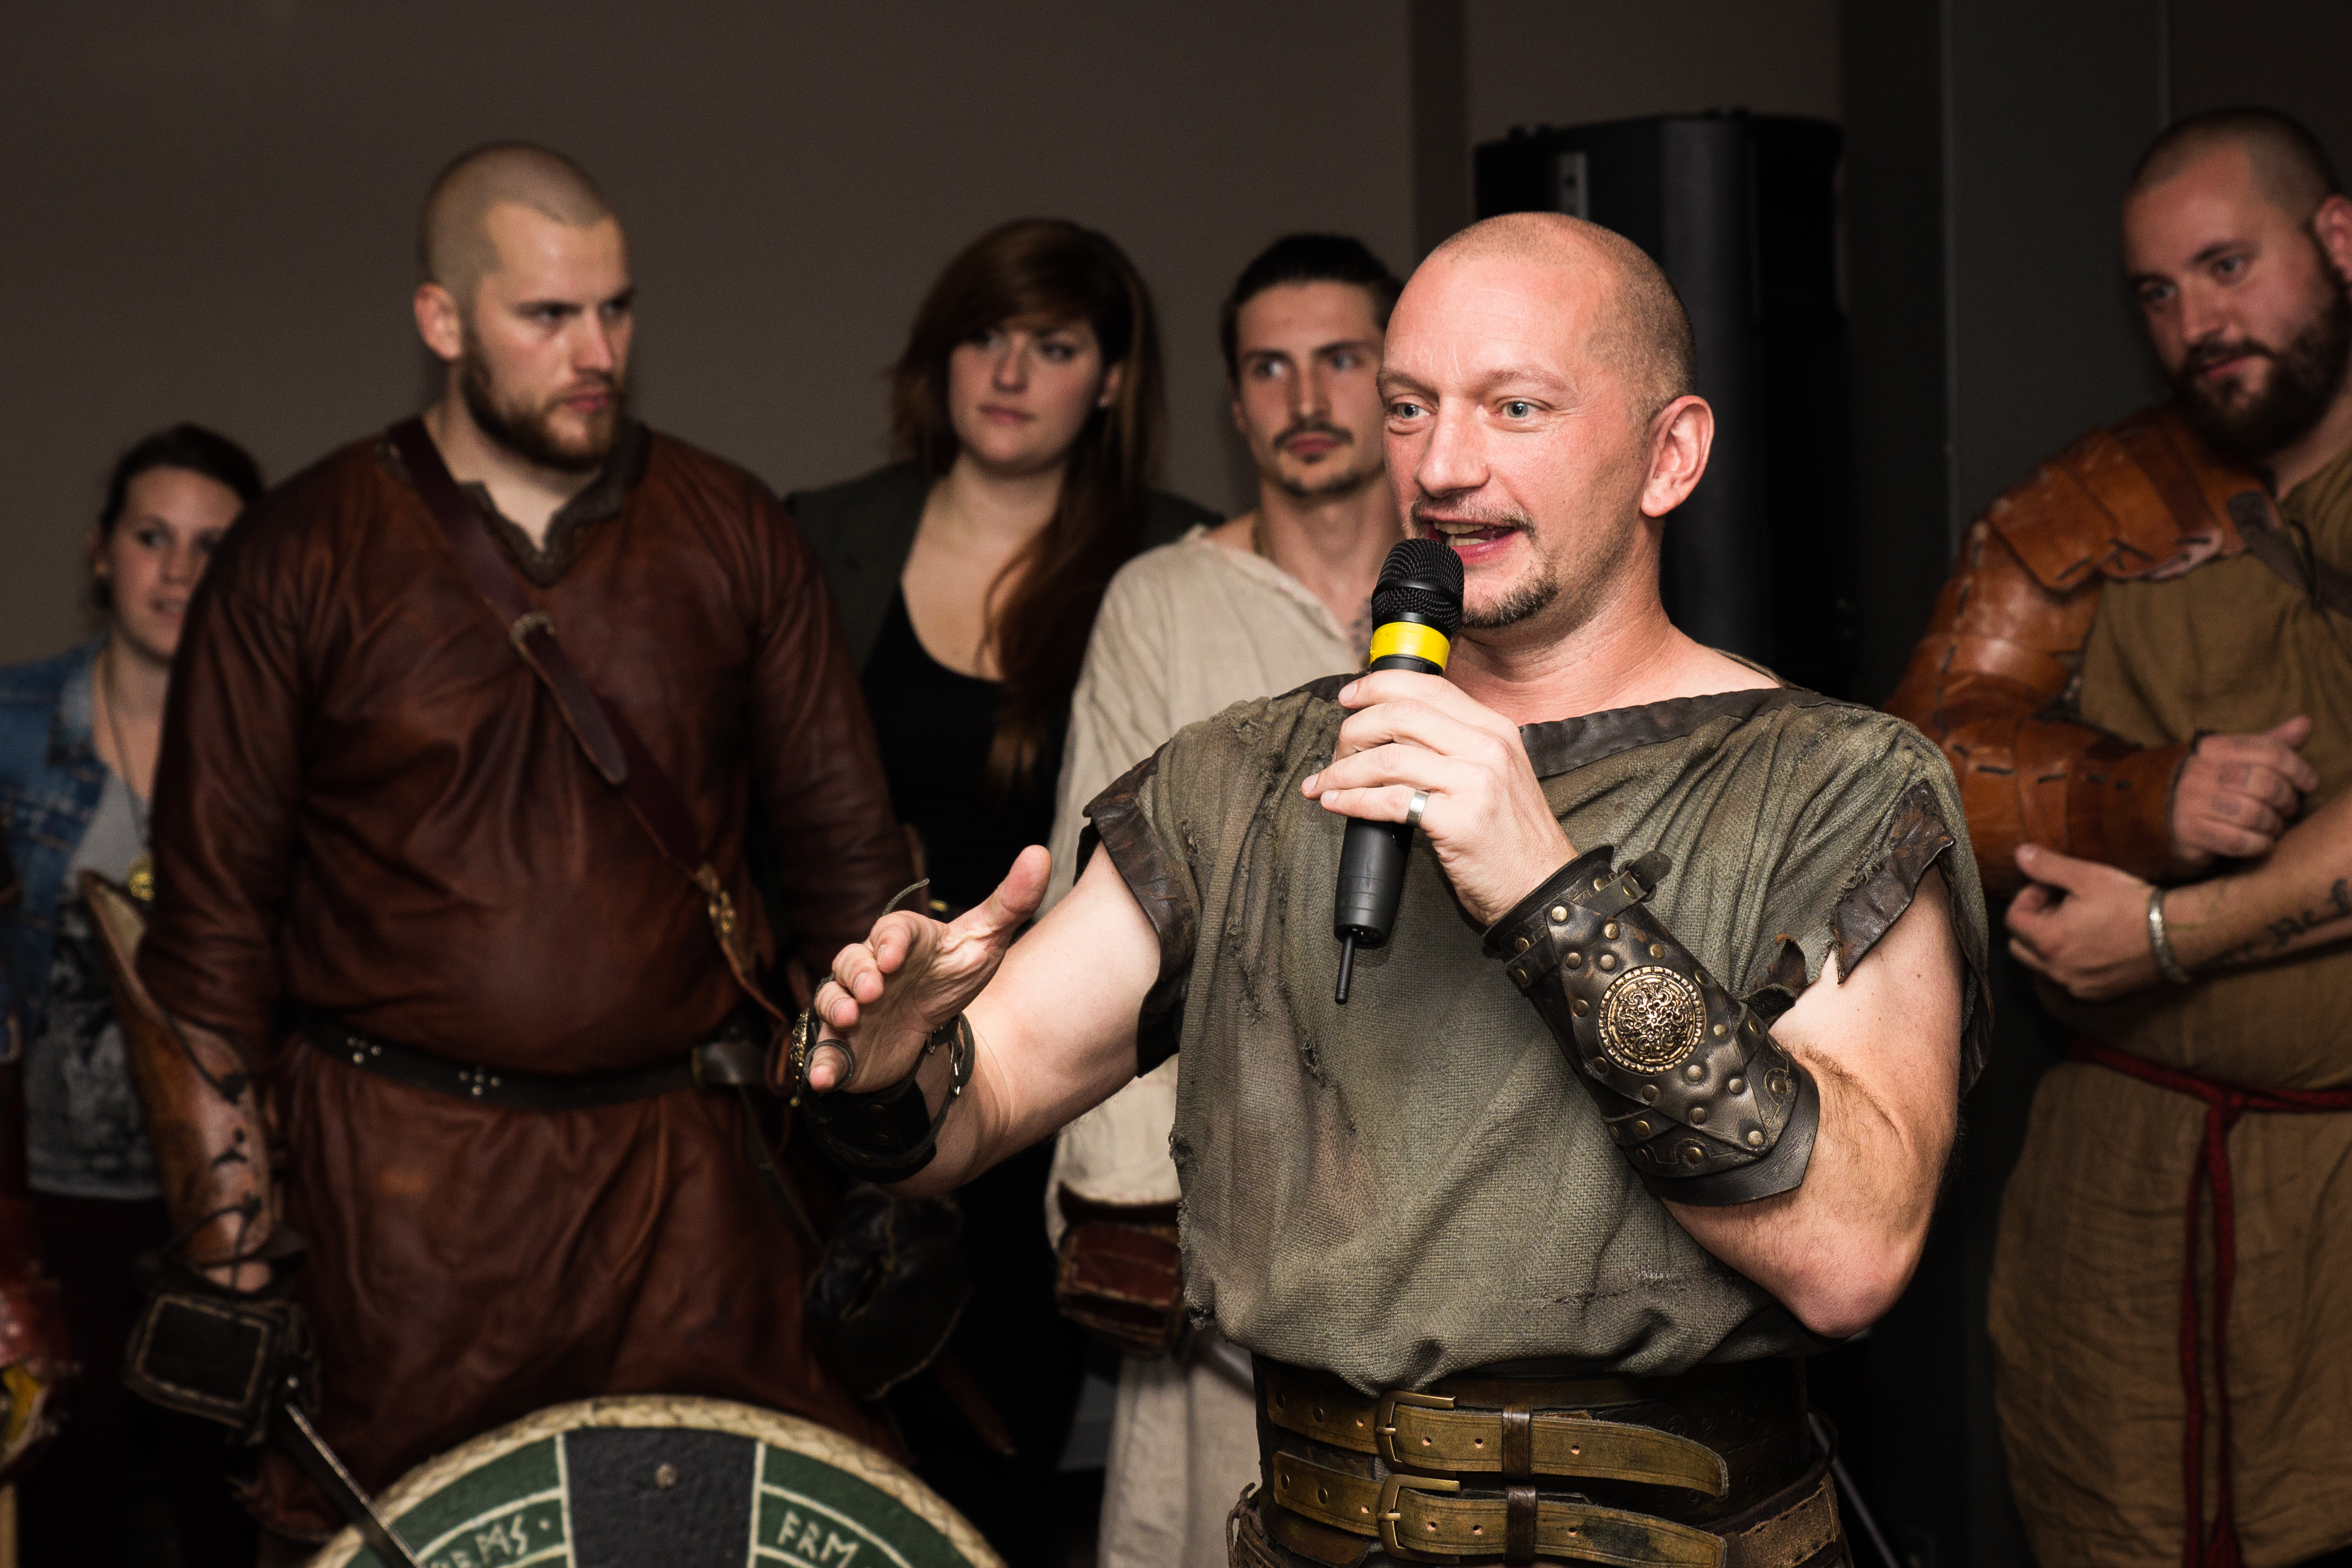 Hosting the Roman night for the promotion of Enemy of Rome